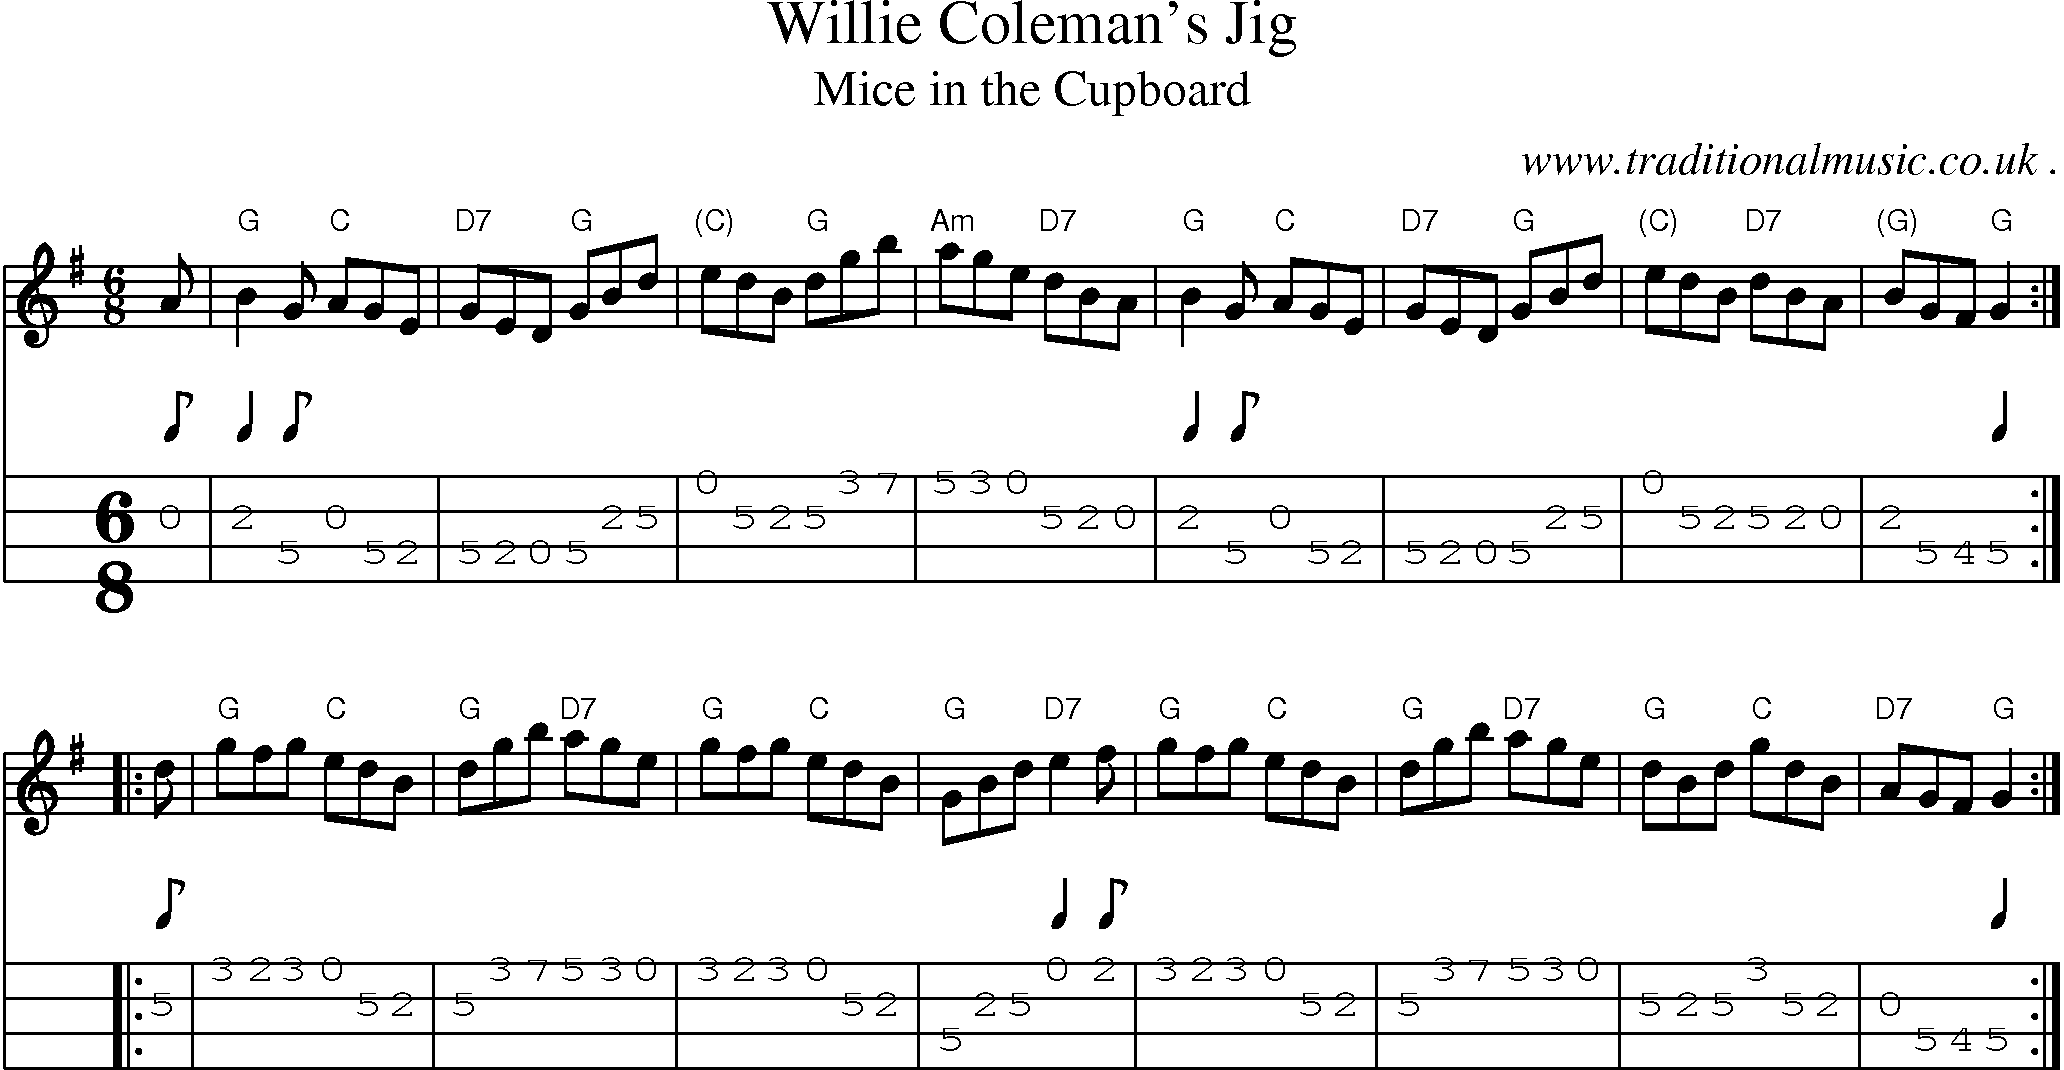 Sheet-music  score, Chords and Mandolin Tabs for Willie Colemans Jig